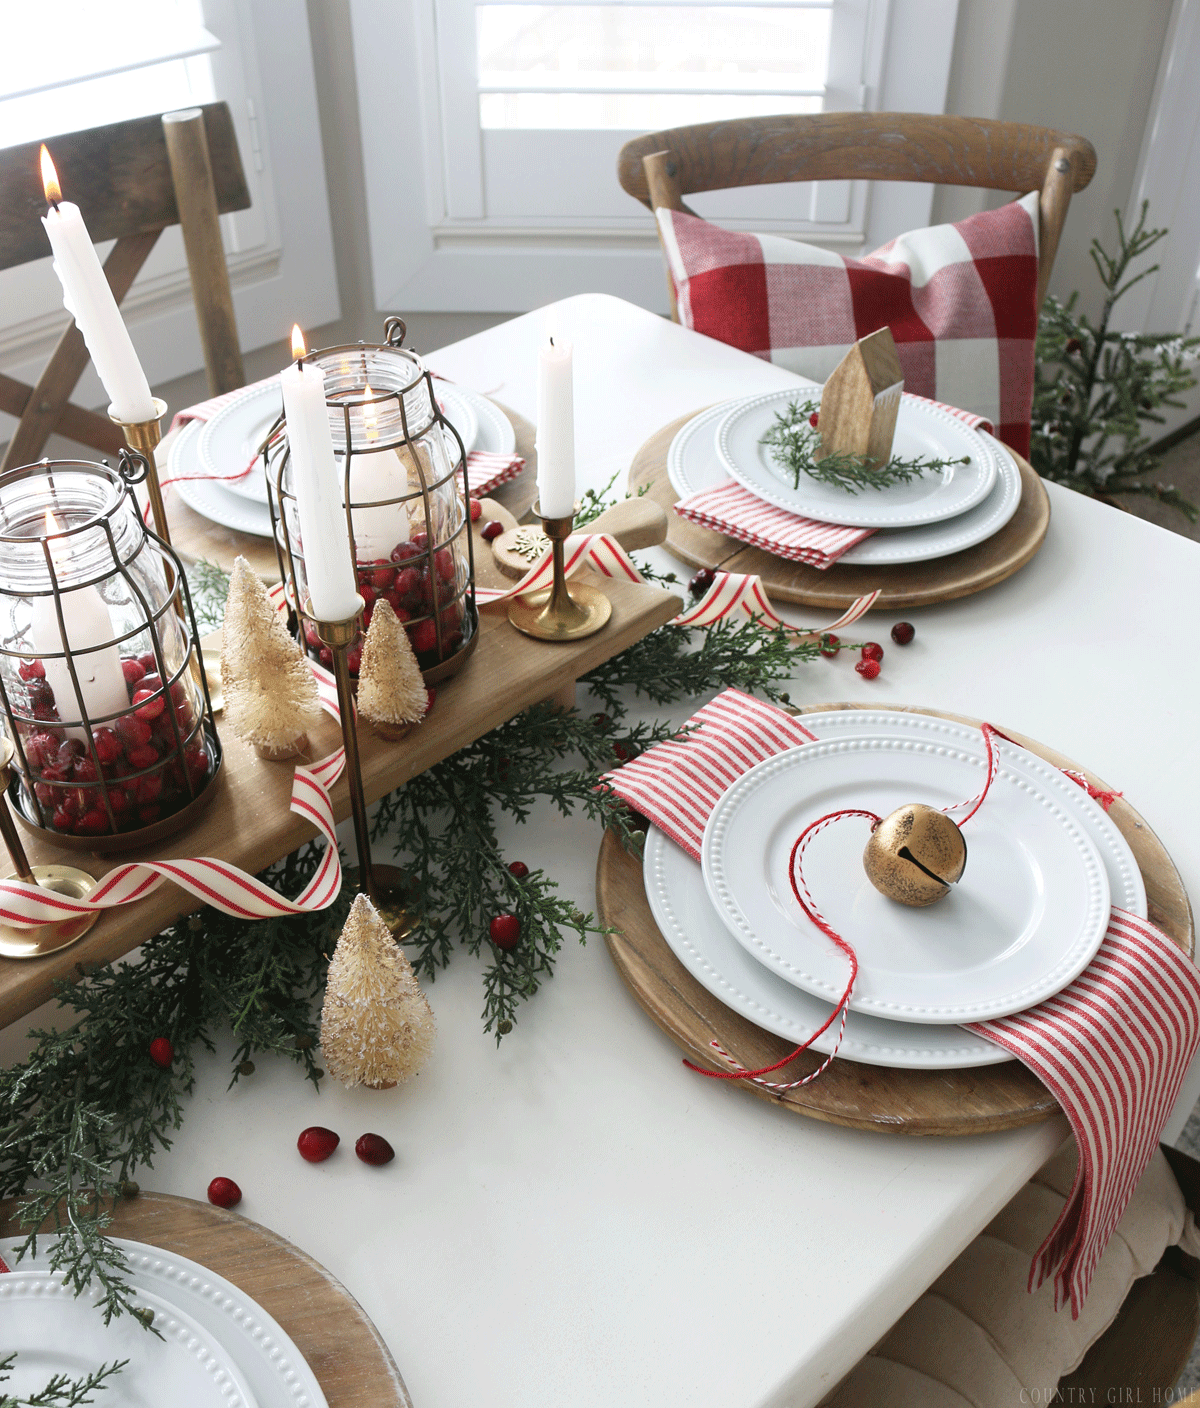 COUNTRY GIRL HOME : CRANBERRY AND CANDLE TABLESCAPE